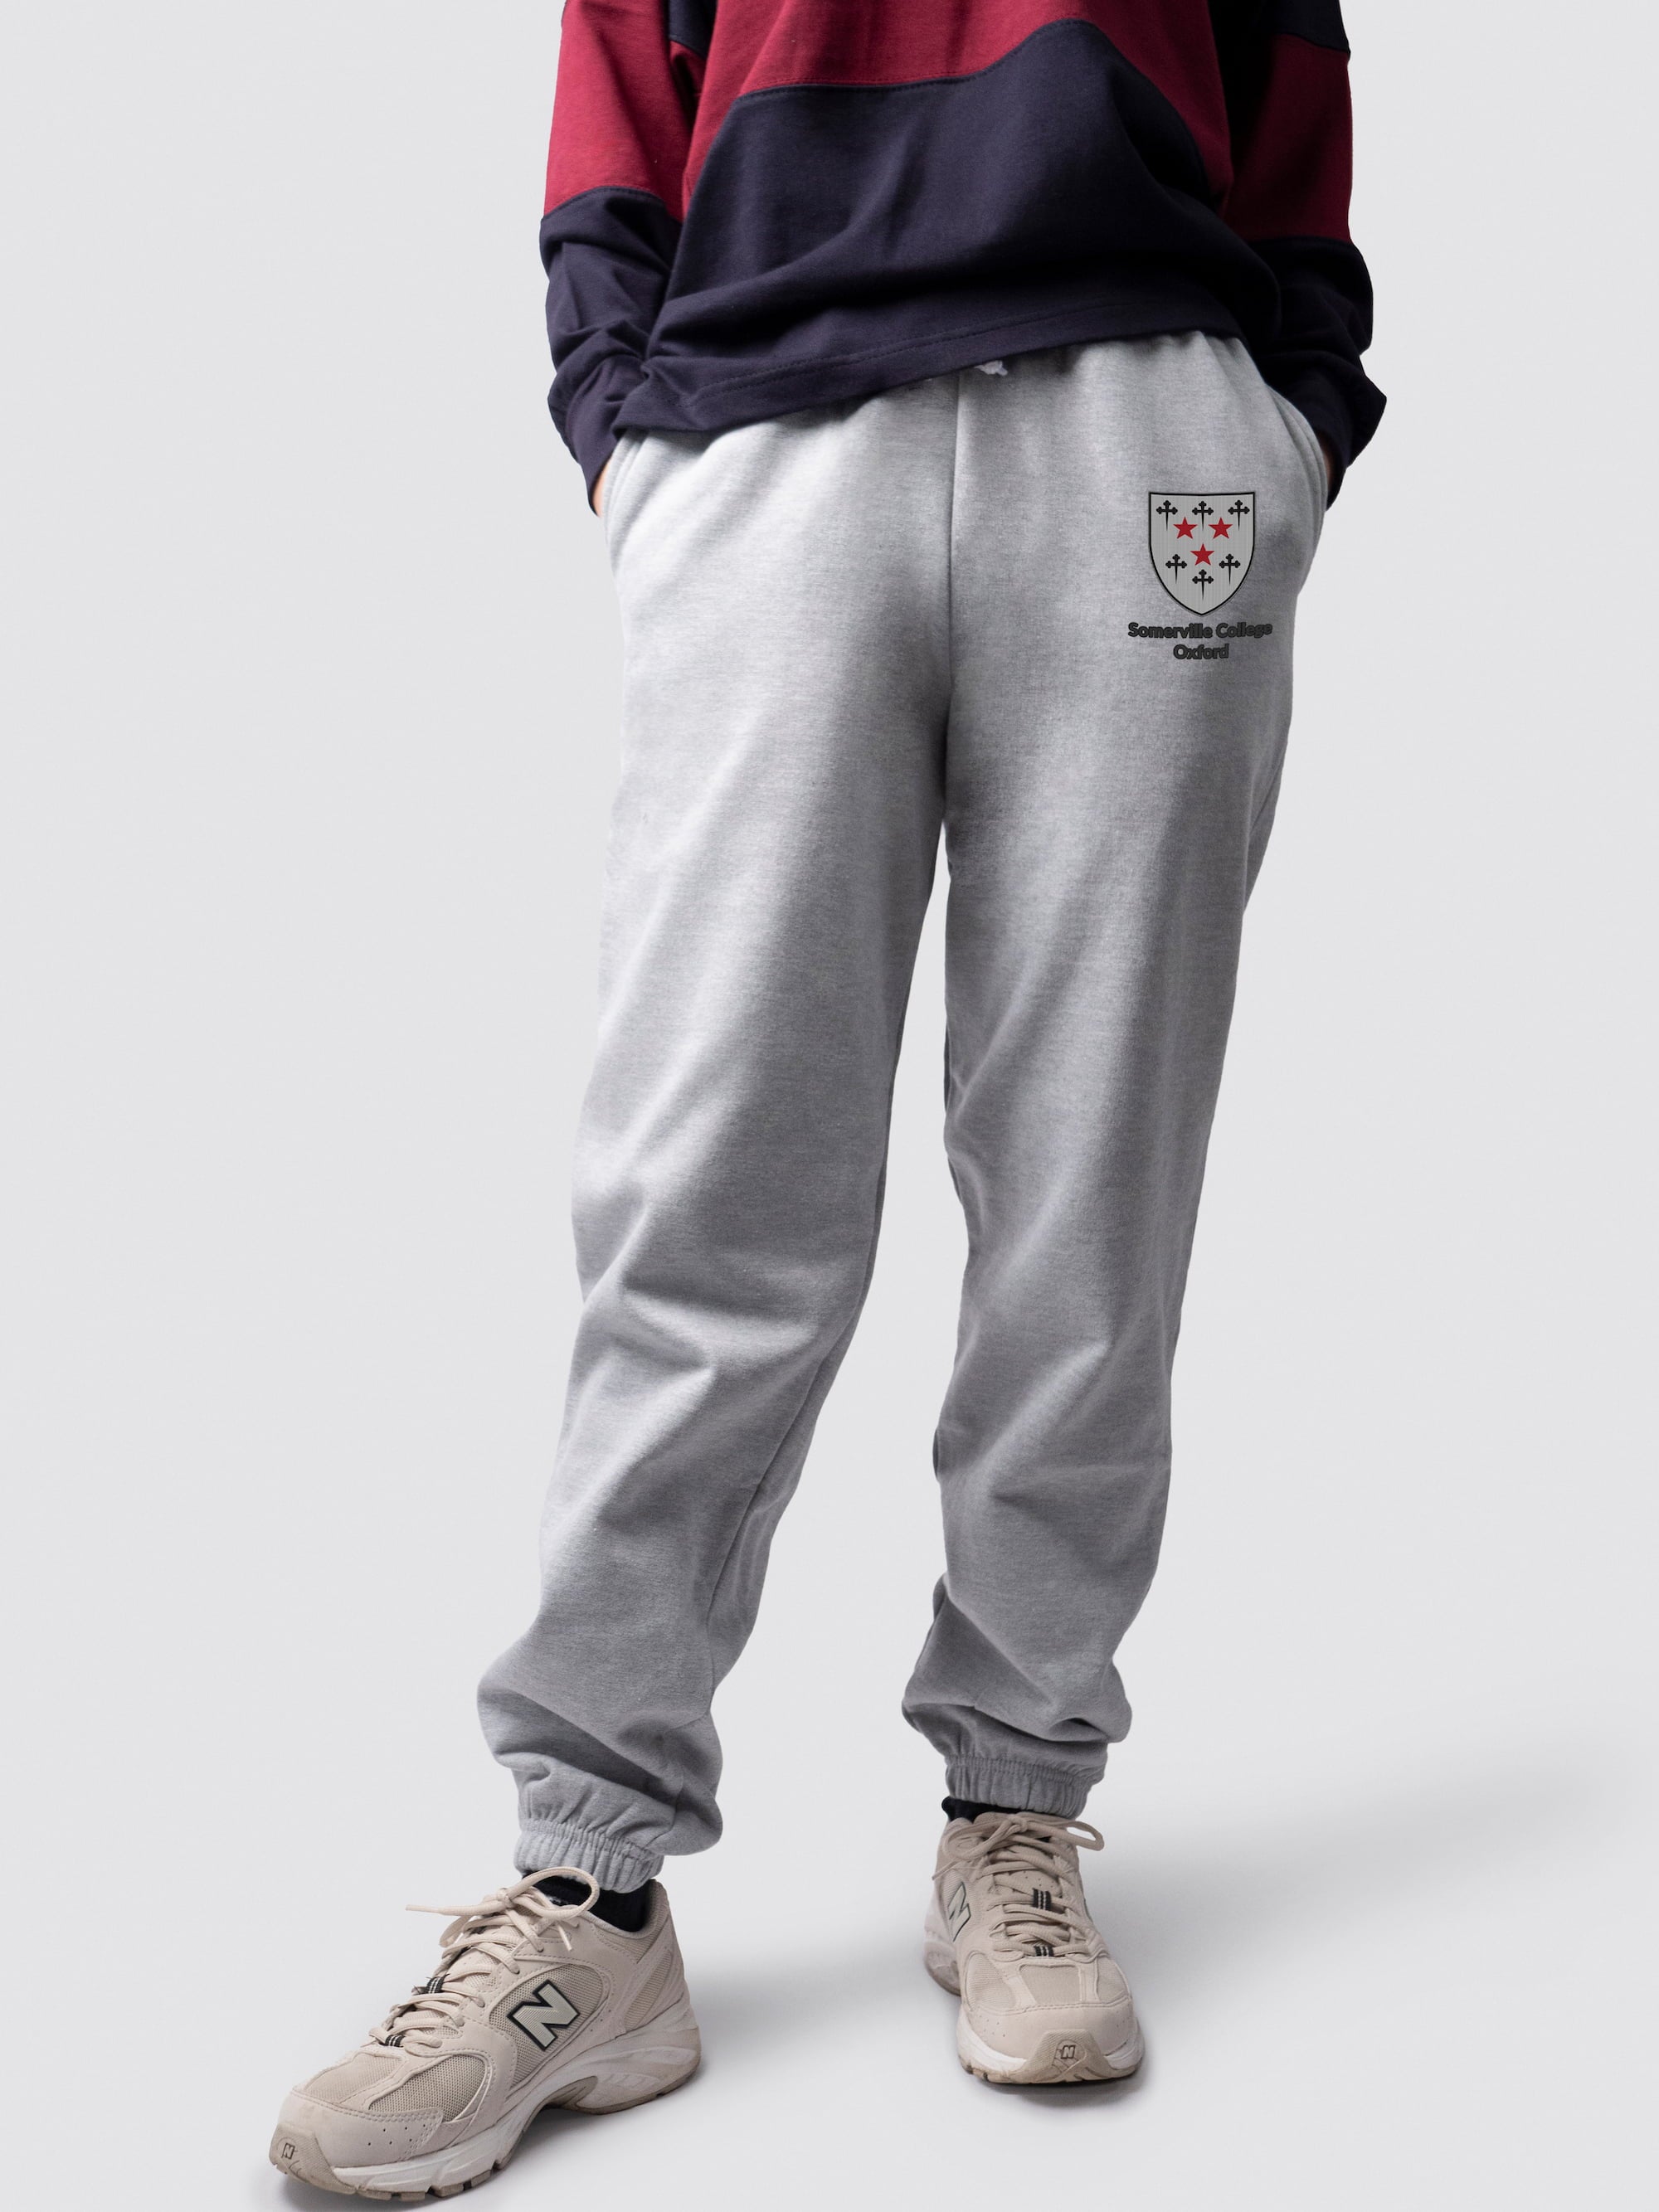 undergraduate cuffed sweatpants, made from soft cotton fabric, with Somerville logo